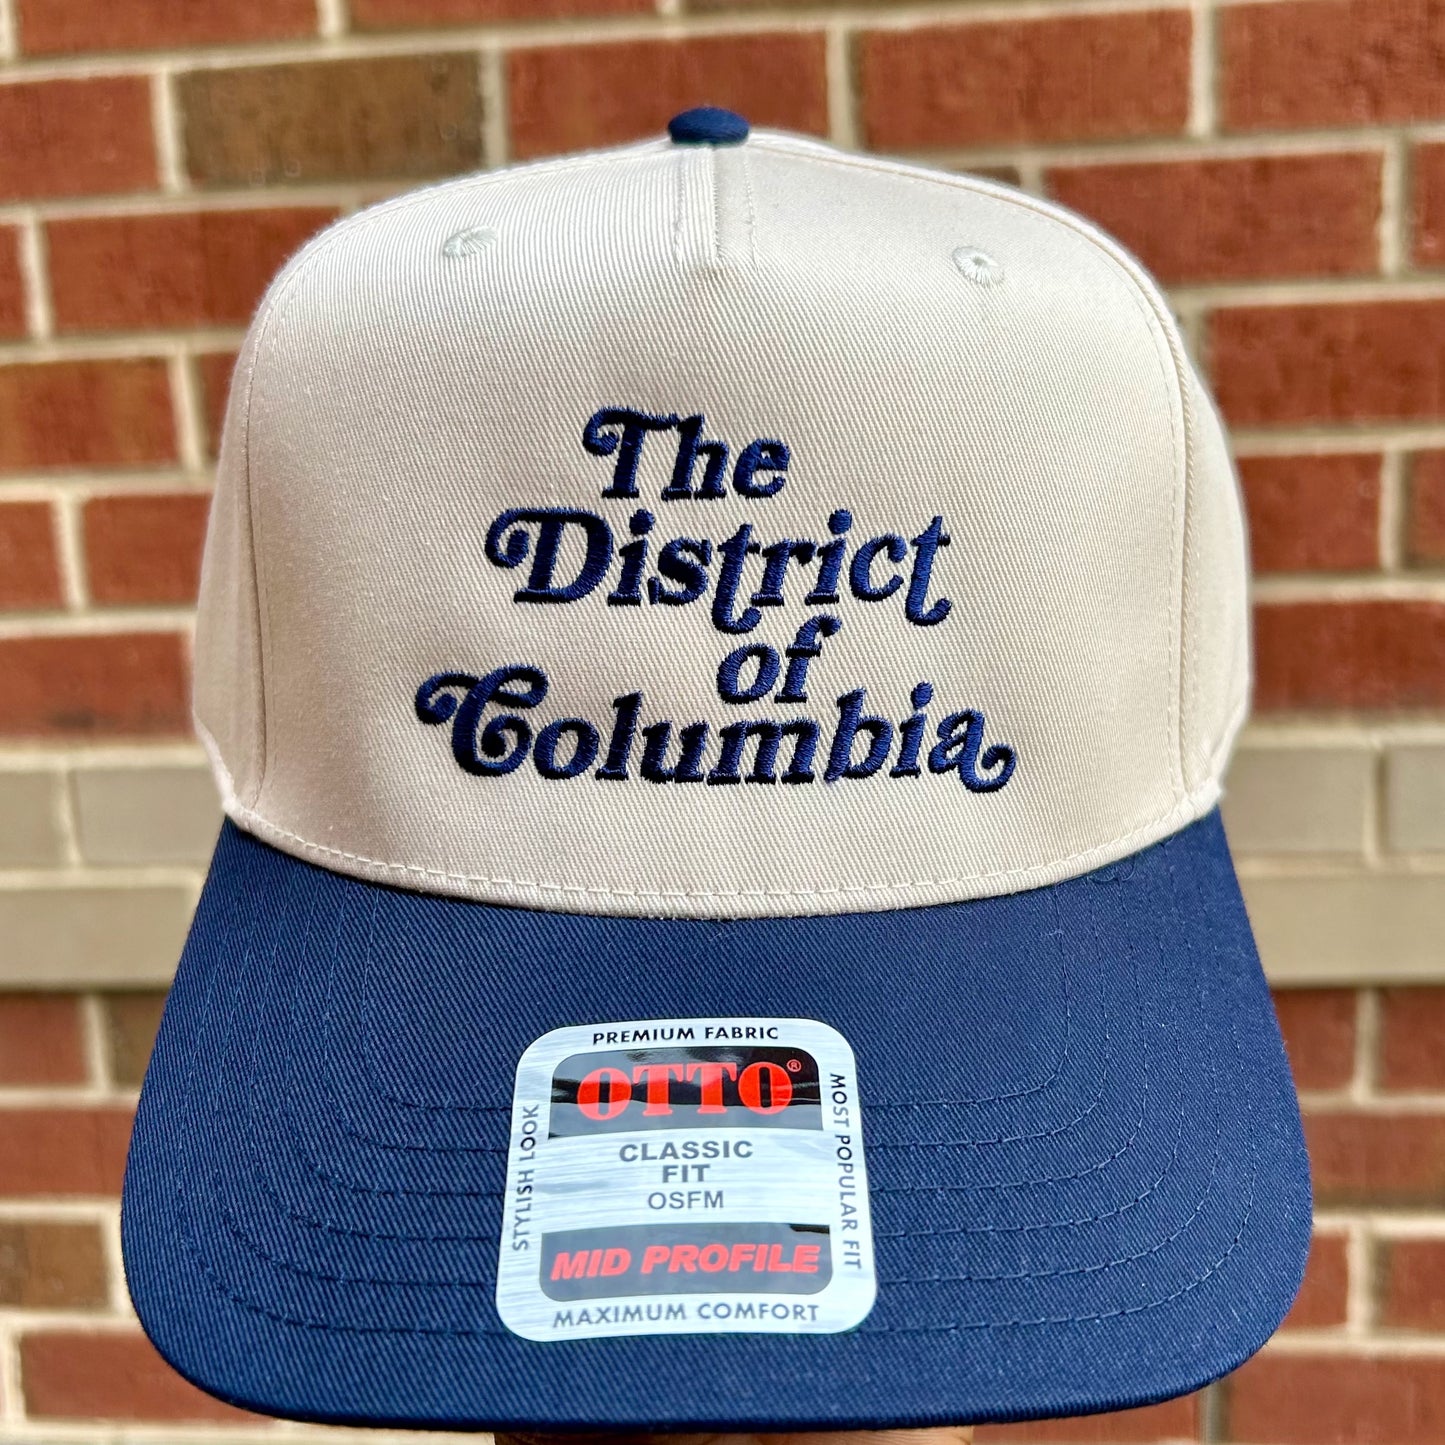 The District of Columbia“ 5-panel mid-rise snapback hat